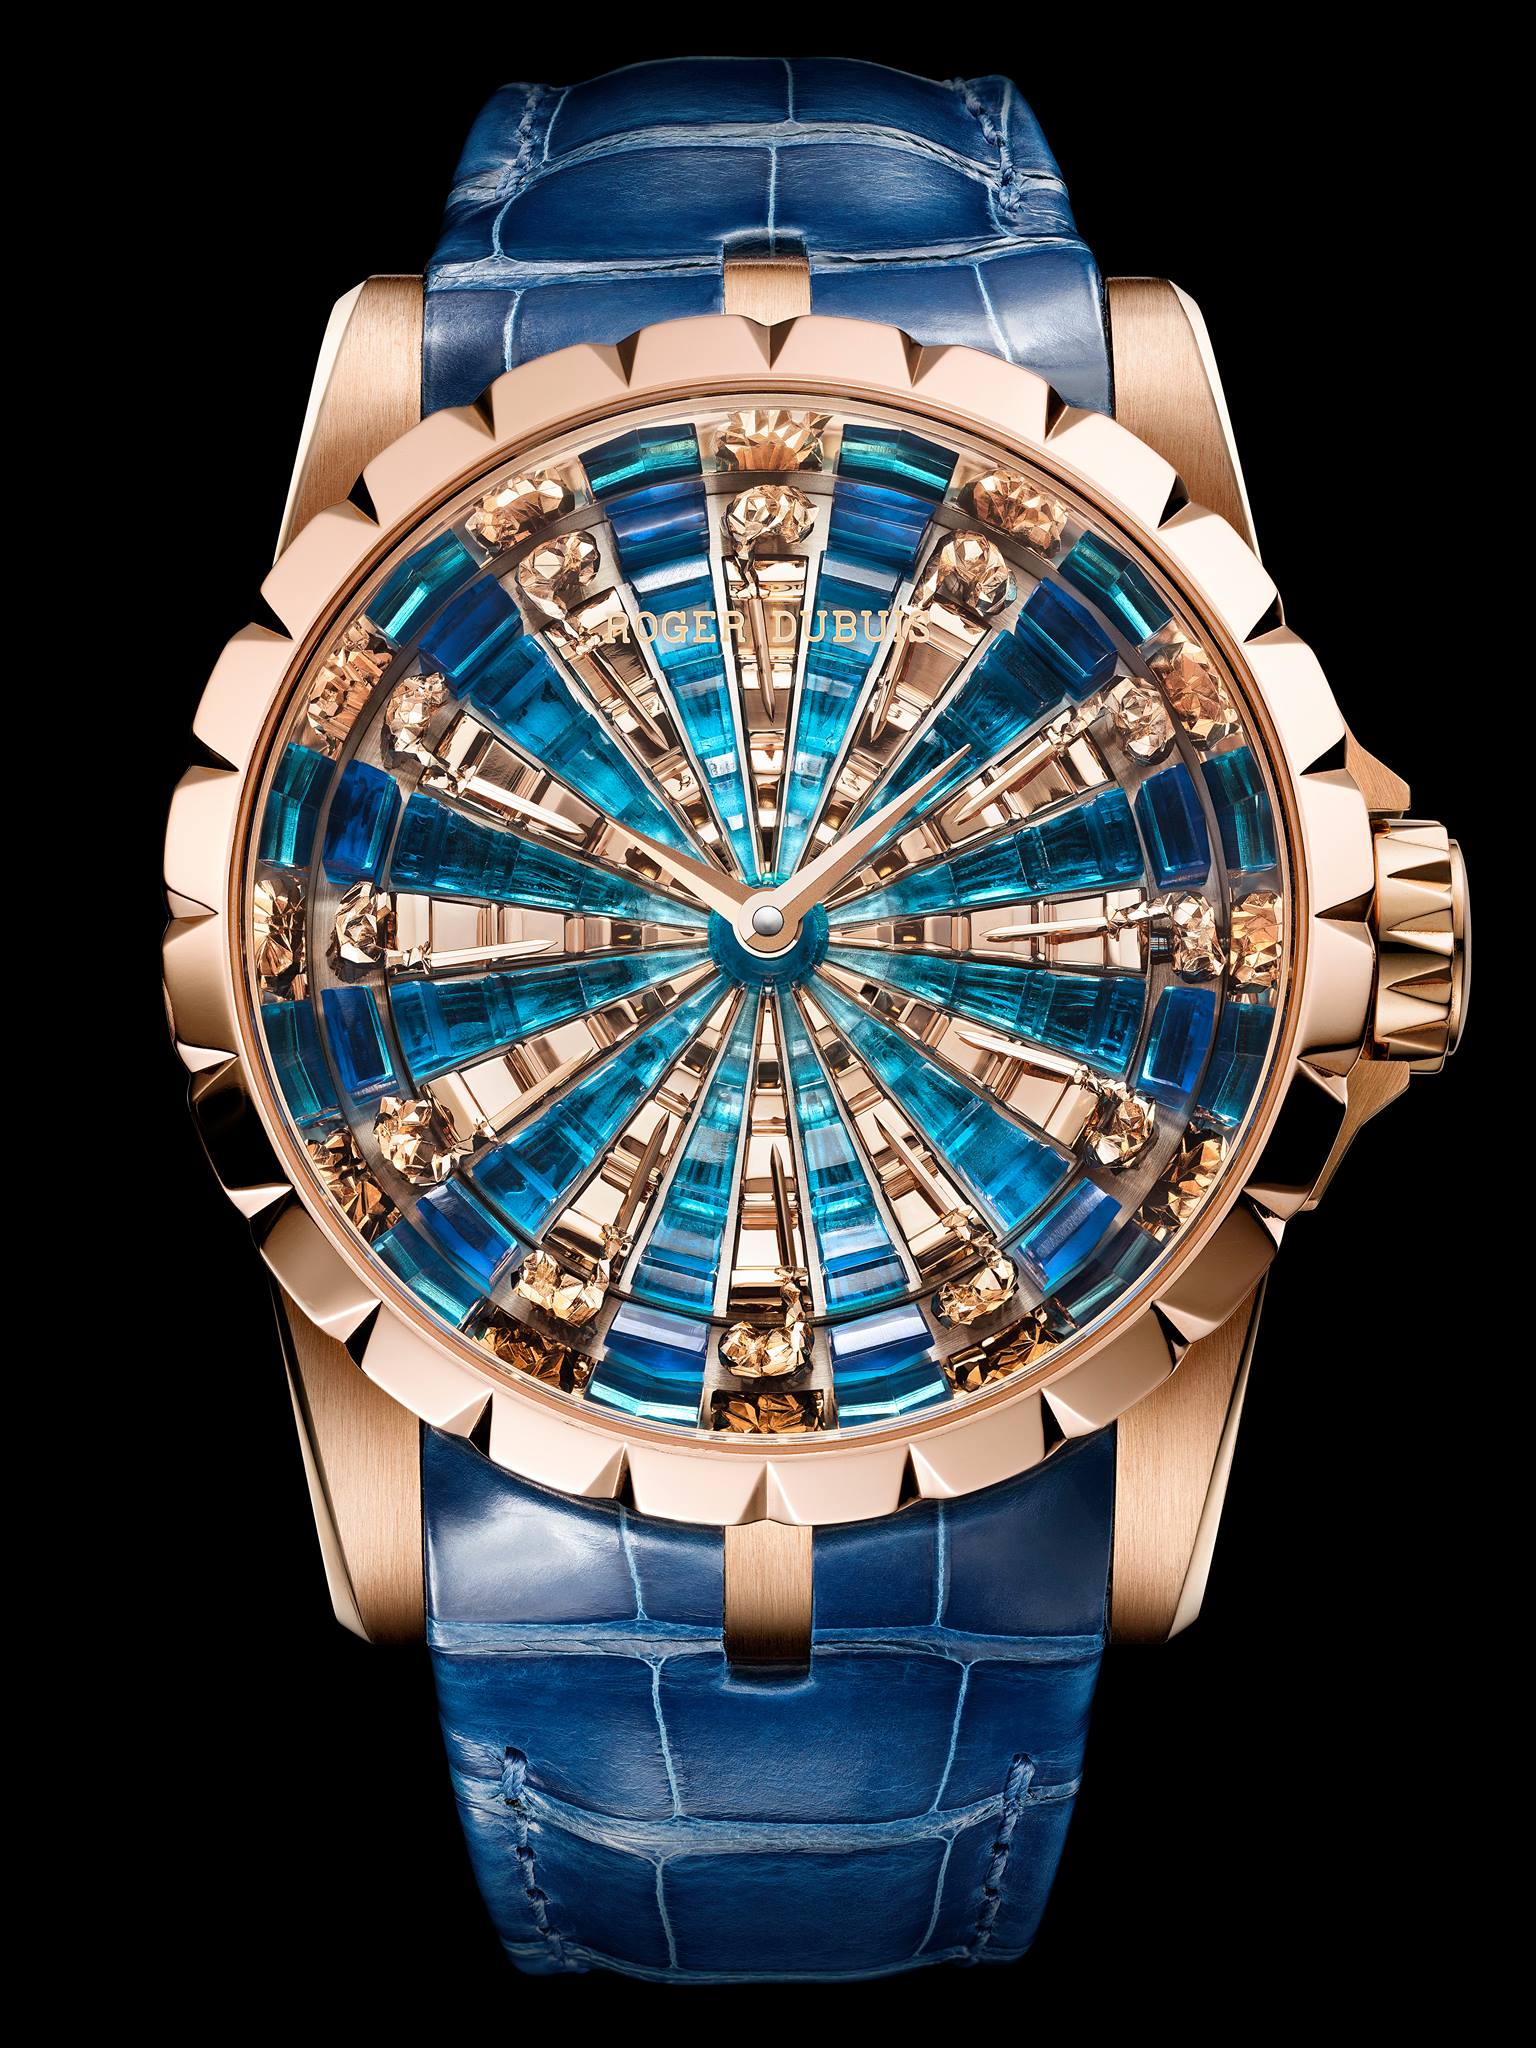 Часы рыцари круглого. Roger Dubuis 12 рыцарей. Roger Dubuis часы. Часы Roger Dubuis Knights of the Round Table. Roger Dubuis Экскалибур.